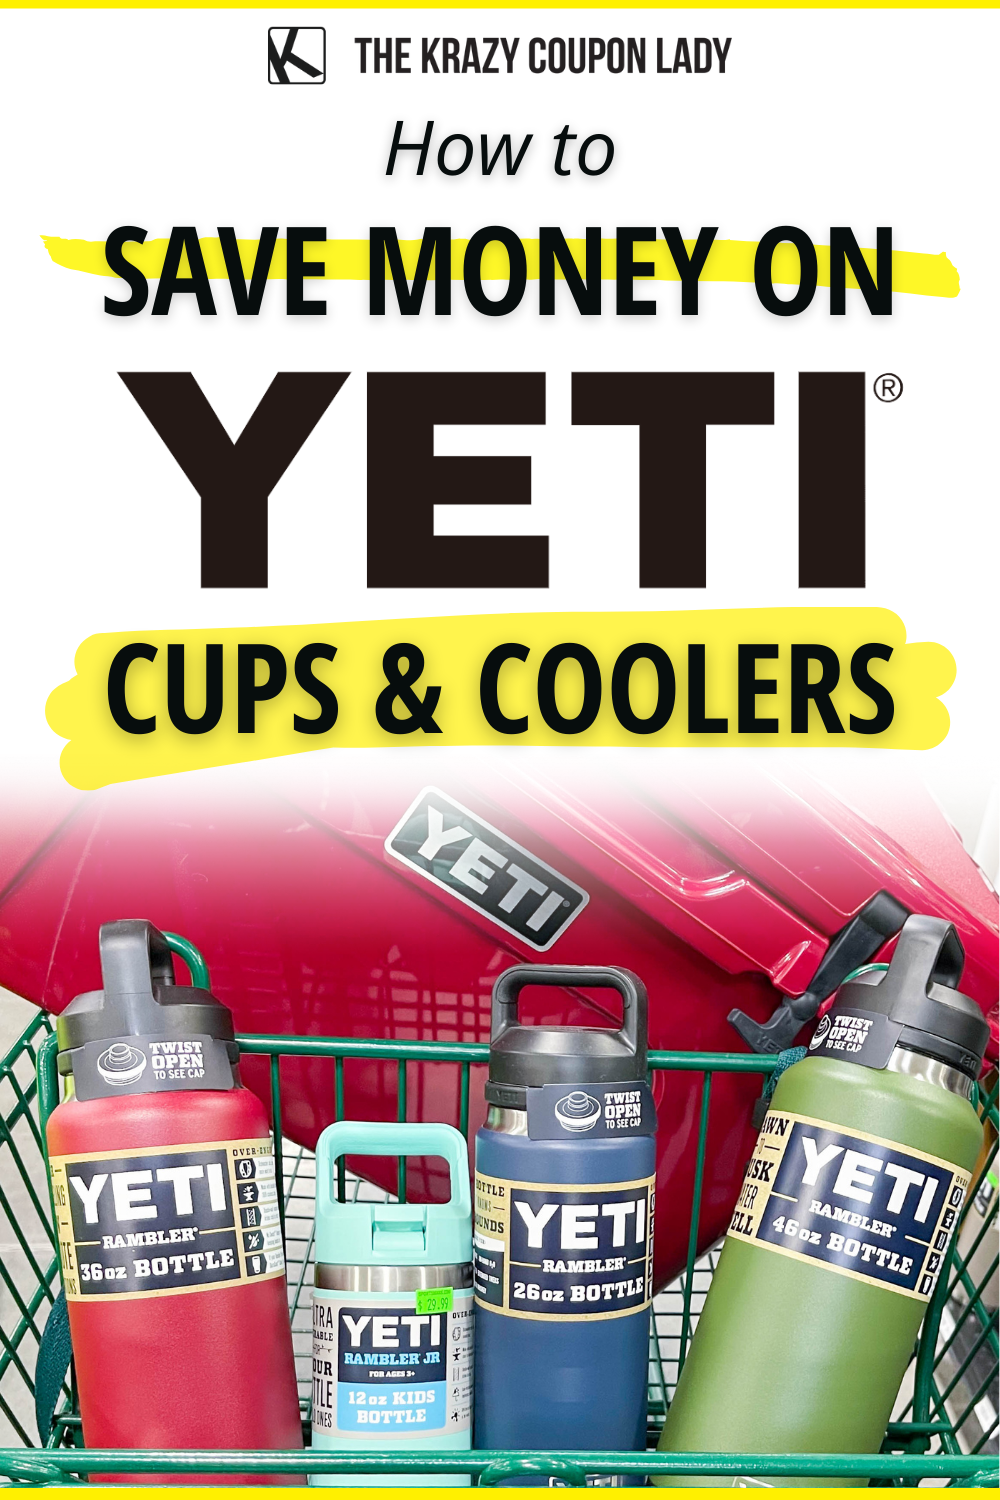 YETI Cooler Sales - 19 Tips on How to Find the Best Deals - The